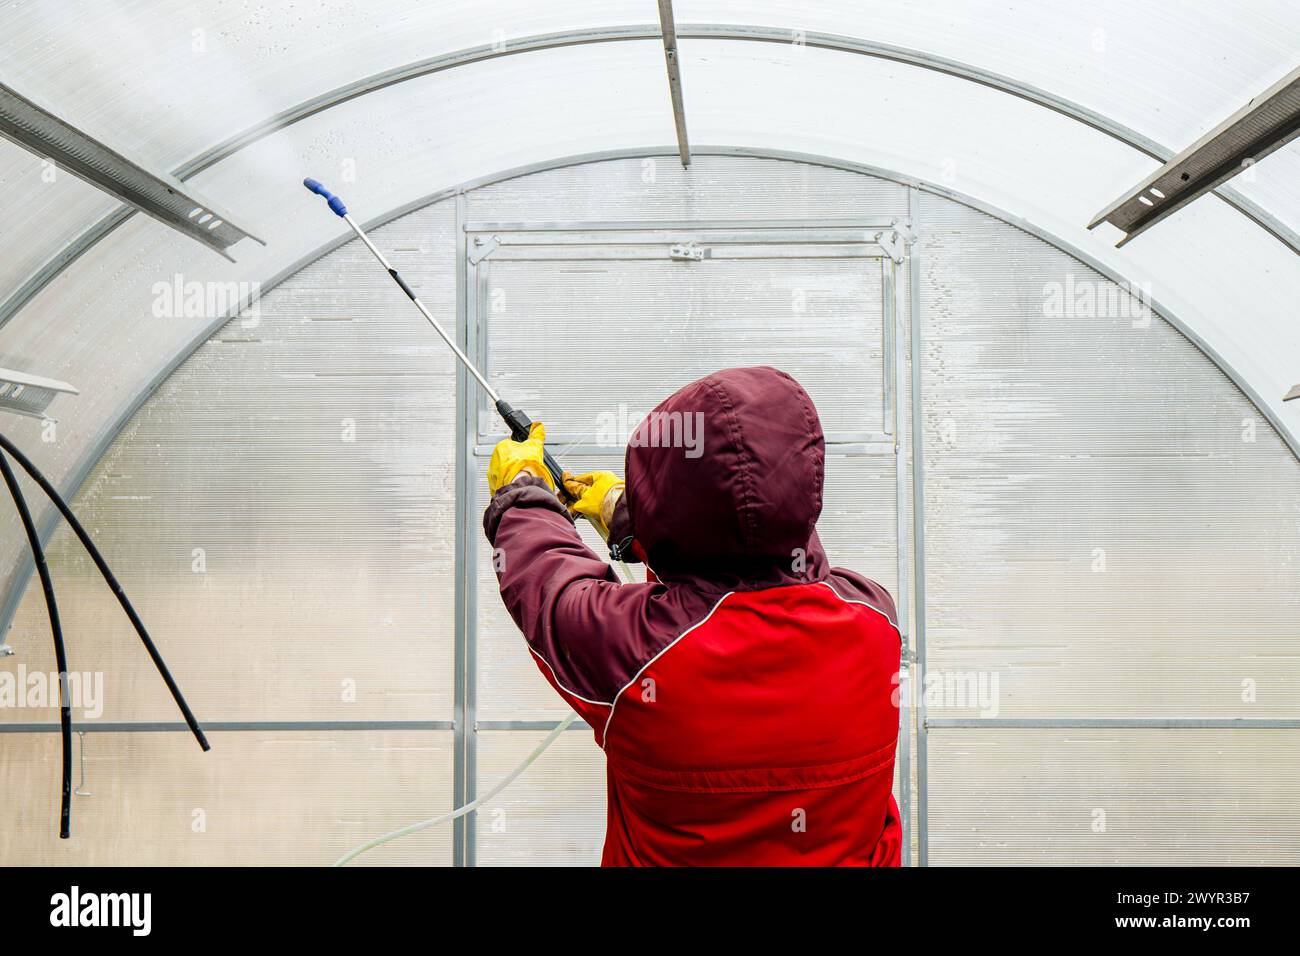 Cleaning the empty greenhouse with an antibacterial cleaner liquid, gardener spray it on the greenhouse wall for disinfection. Spring gardening. Stock Photo